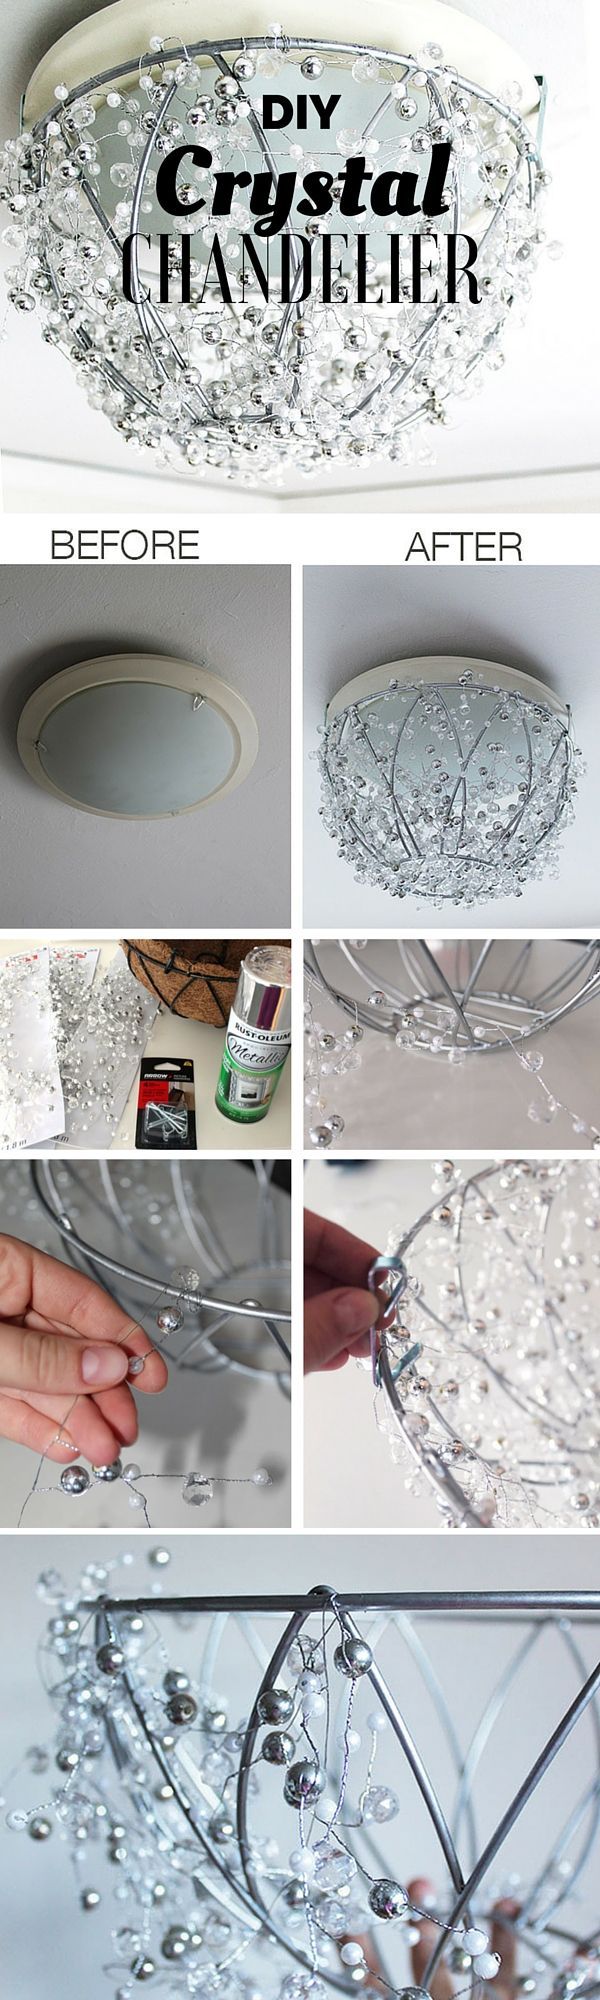 Check out the tutorial: #DIY Crystal Chandelier @Industry Standard Design